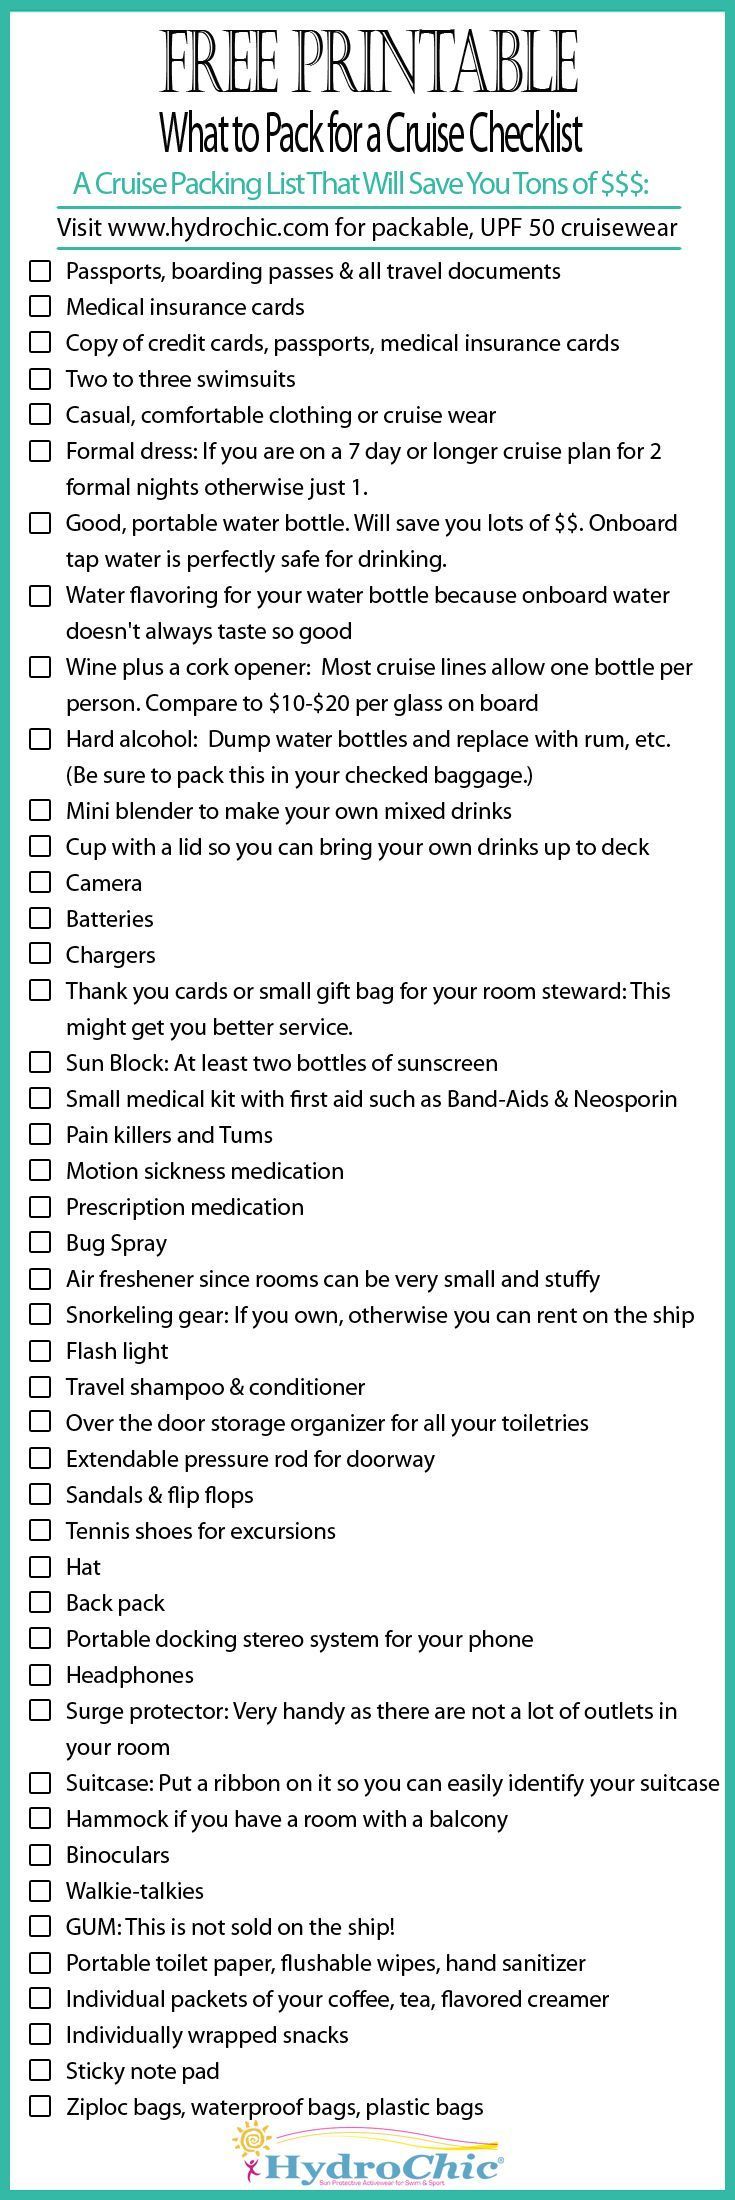 Printable checklist of what to pack for a cruise that will save you lots of $$$.